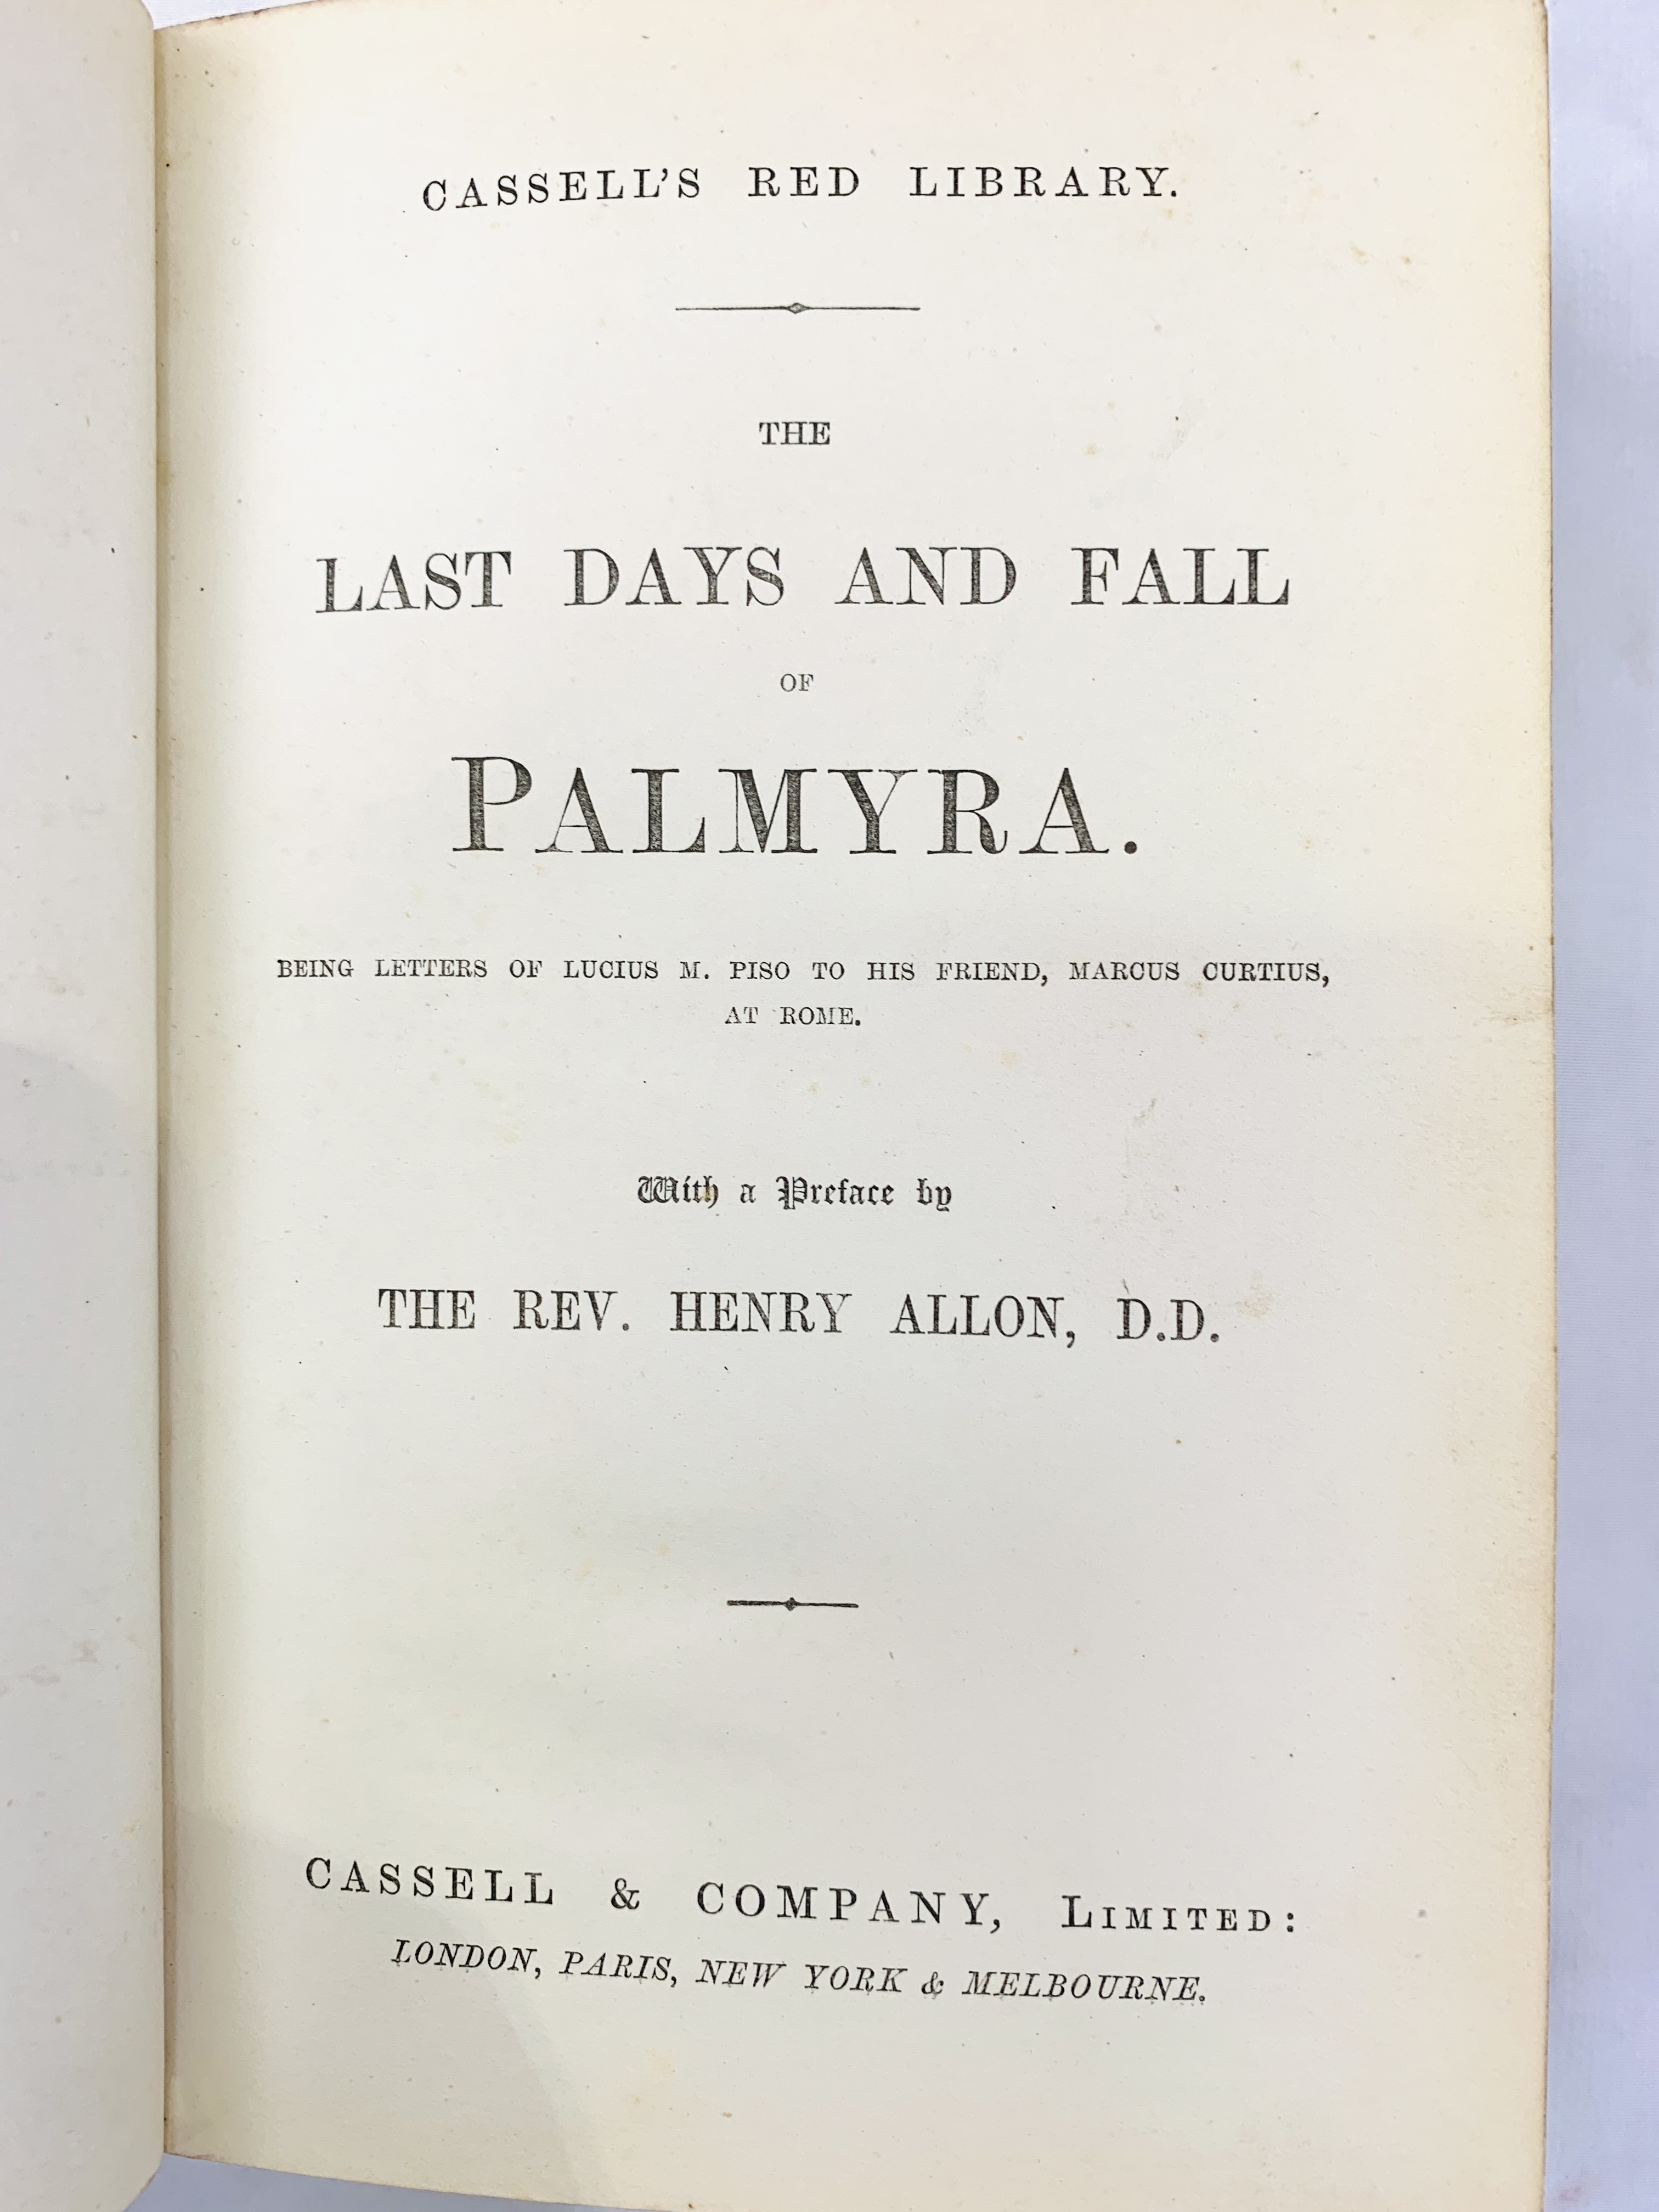 The Last Days and Fall of Palmyra; together with Novum Testamentum Graece - Image 2 of 4